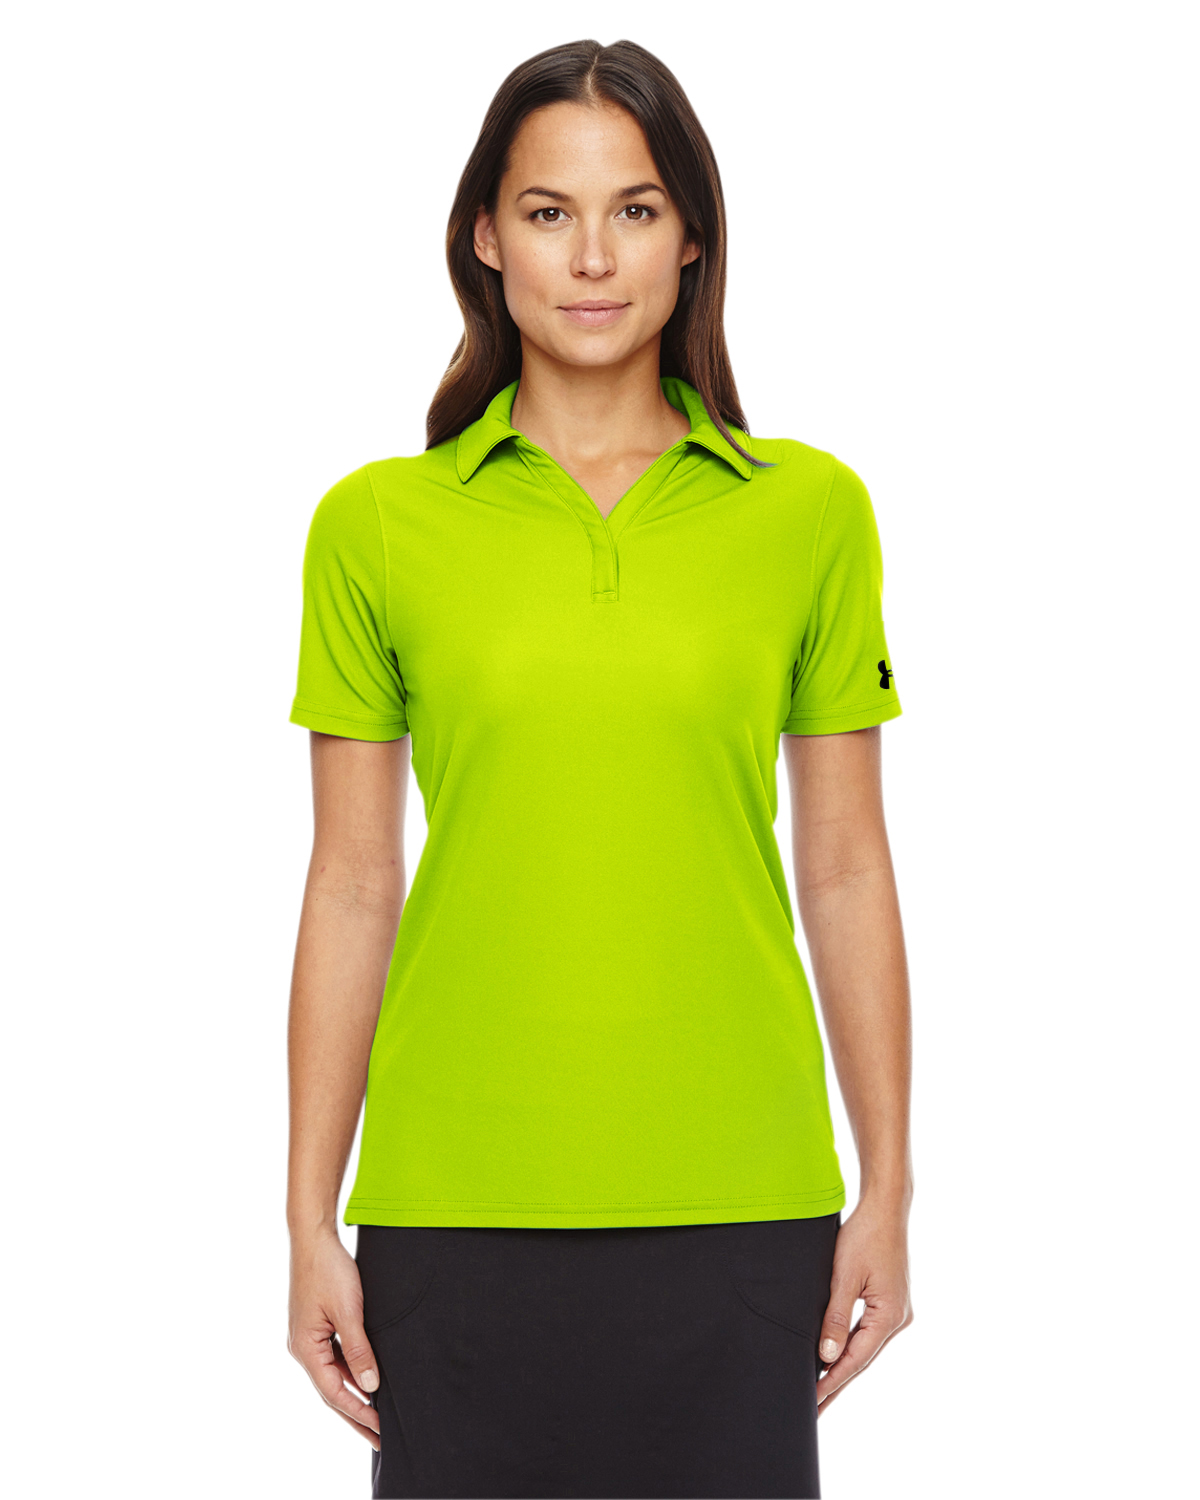 Under Armour Ladies' Corp Performance Polo